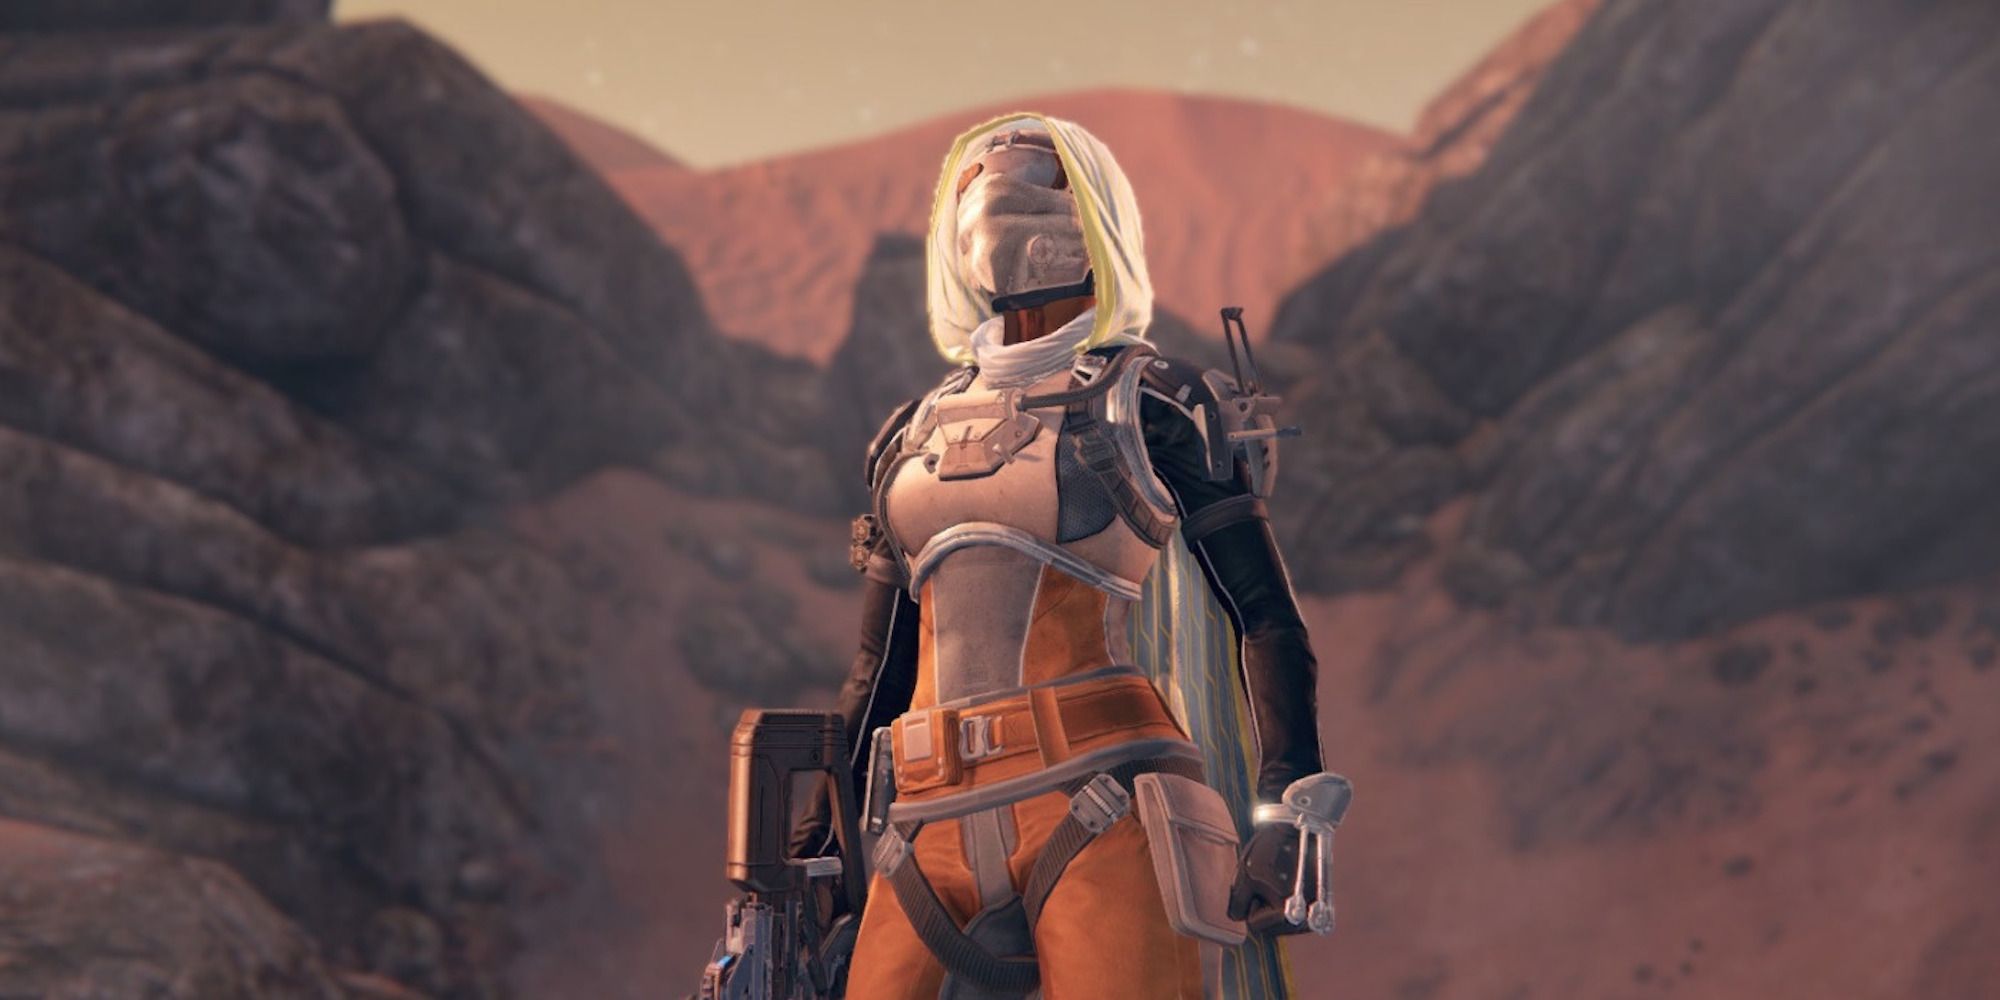 The player character from Destiny 2